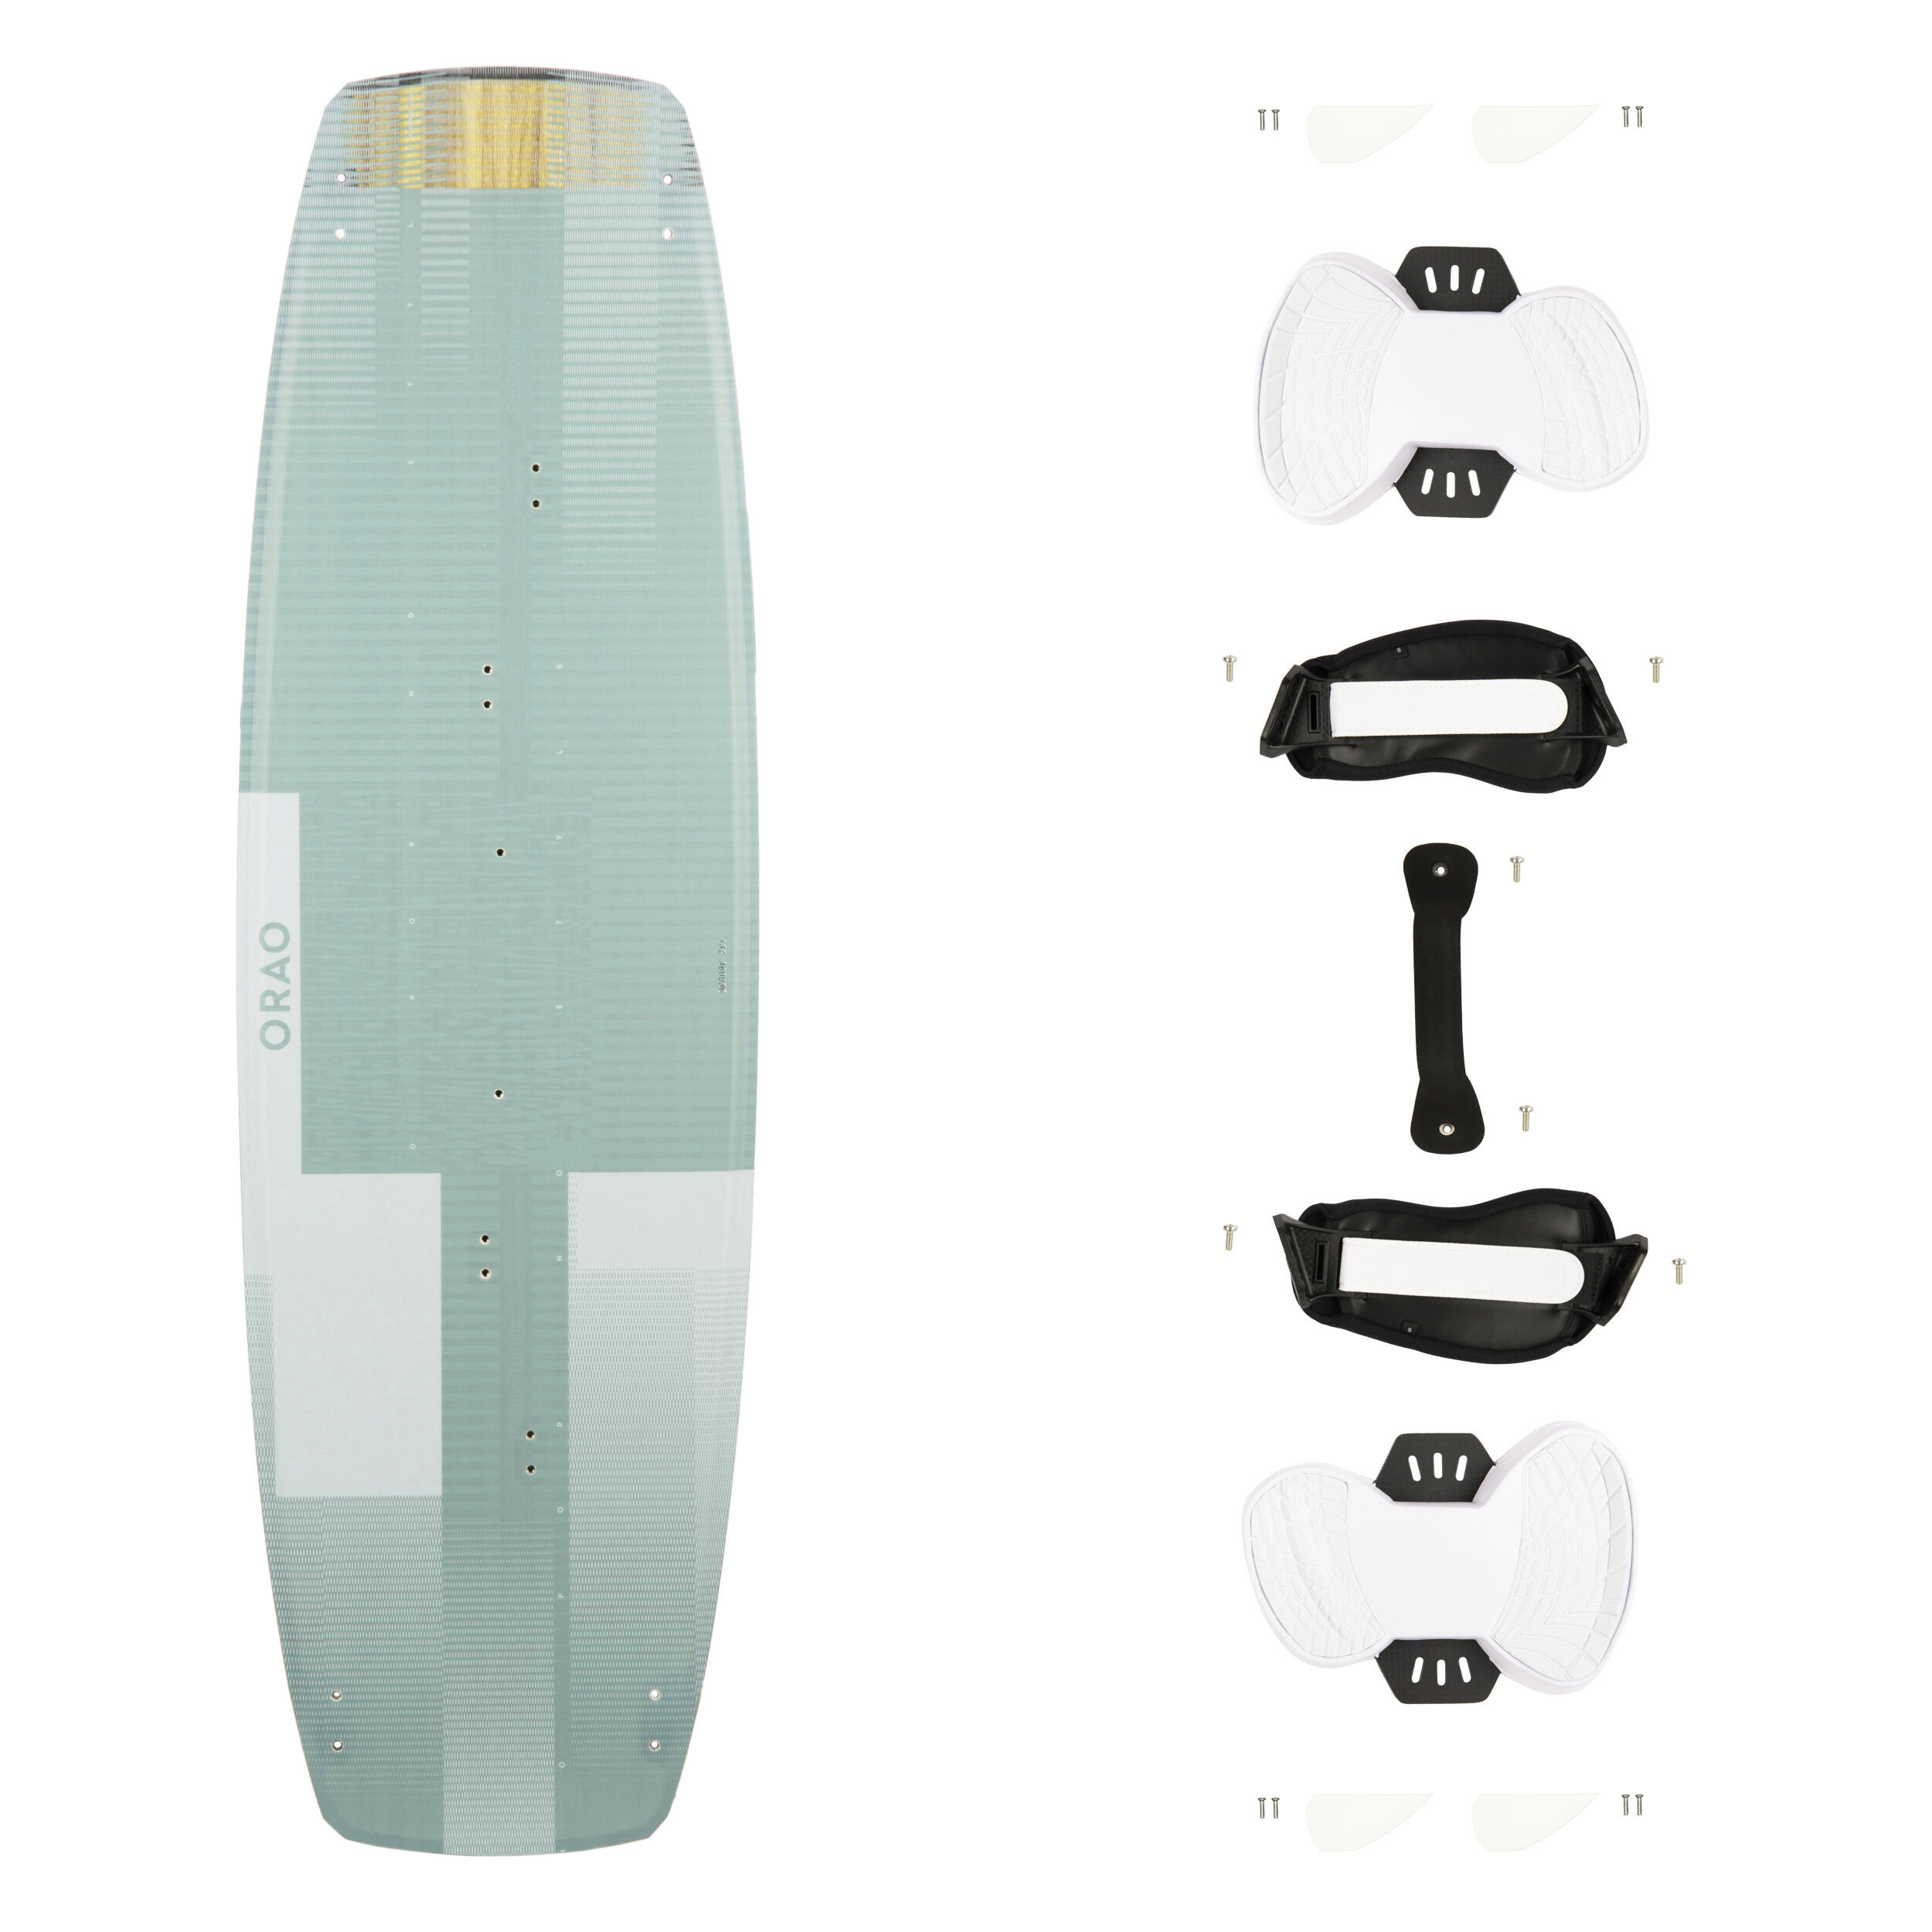 KITESURFING BOARD “TWIN-TIP 500" - CARBON - 132X39 CM (PADS AND STRAPS INCLUDED) 1/17